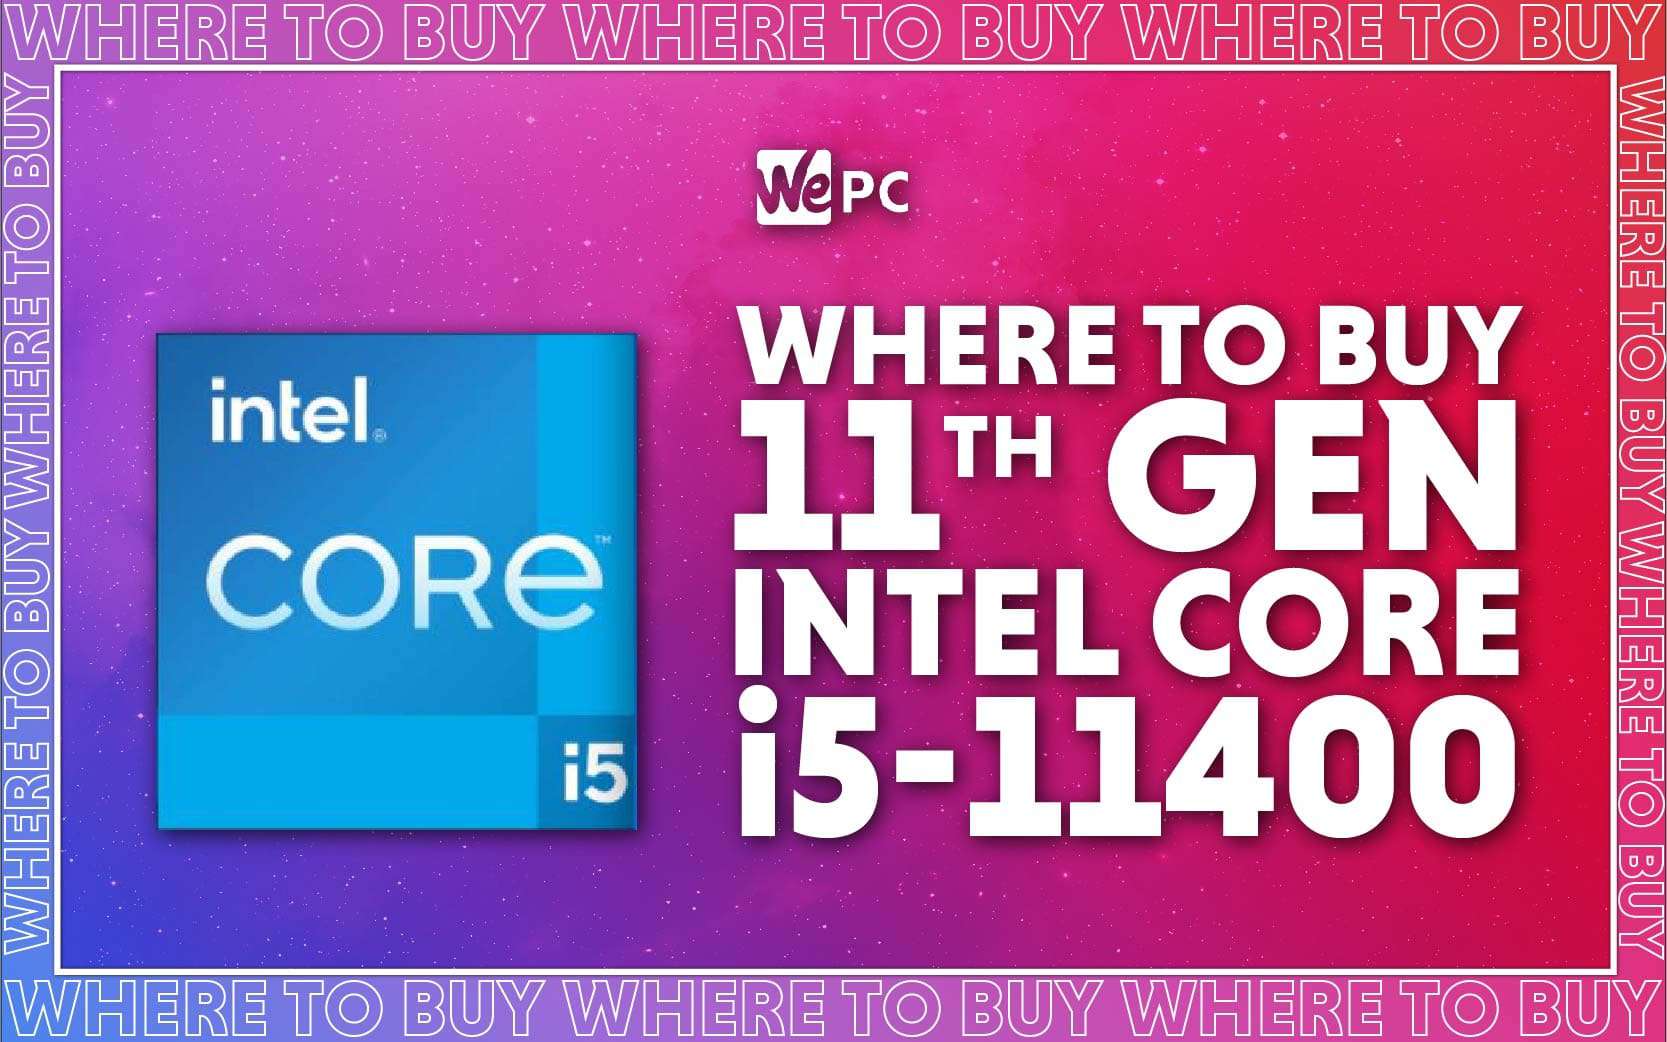 WePC Intel core 11th gen i5 11400 where to buy feature image 01